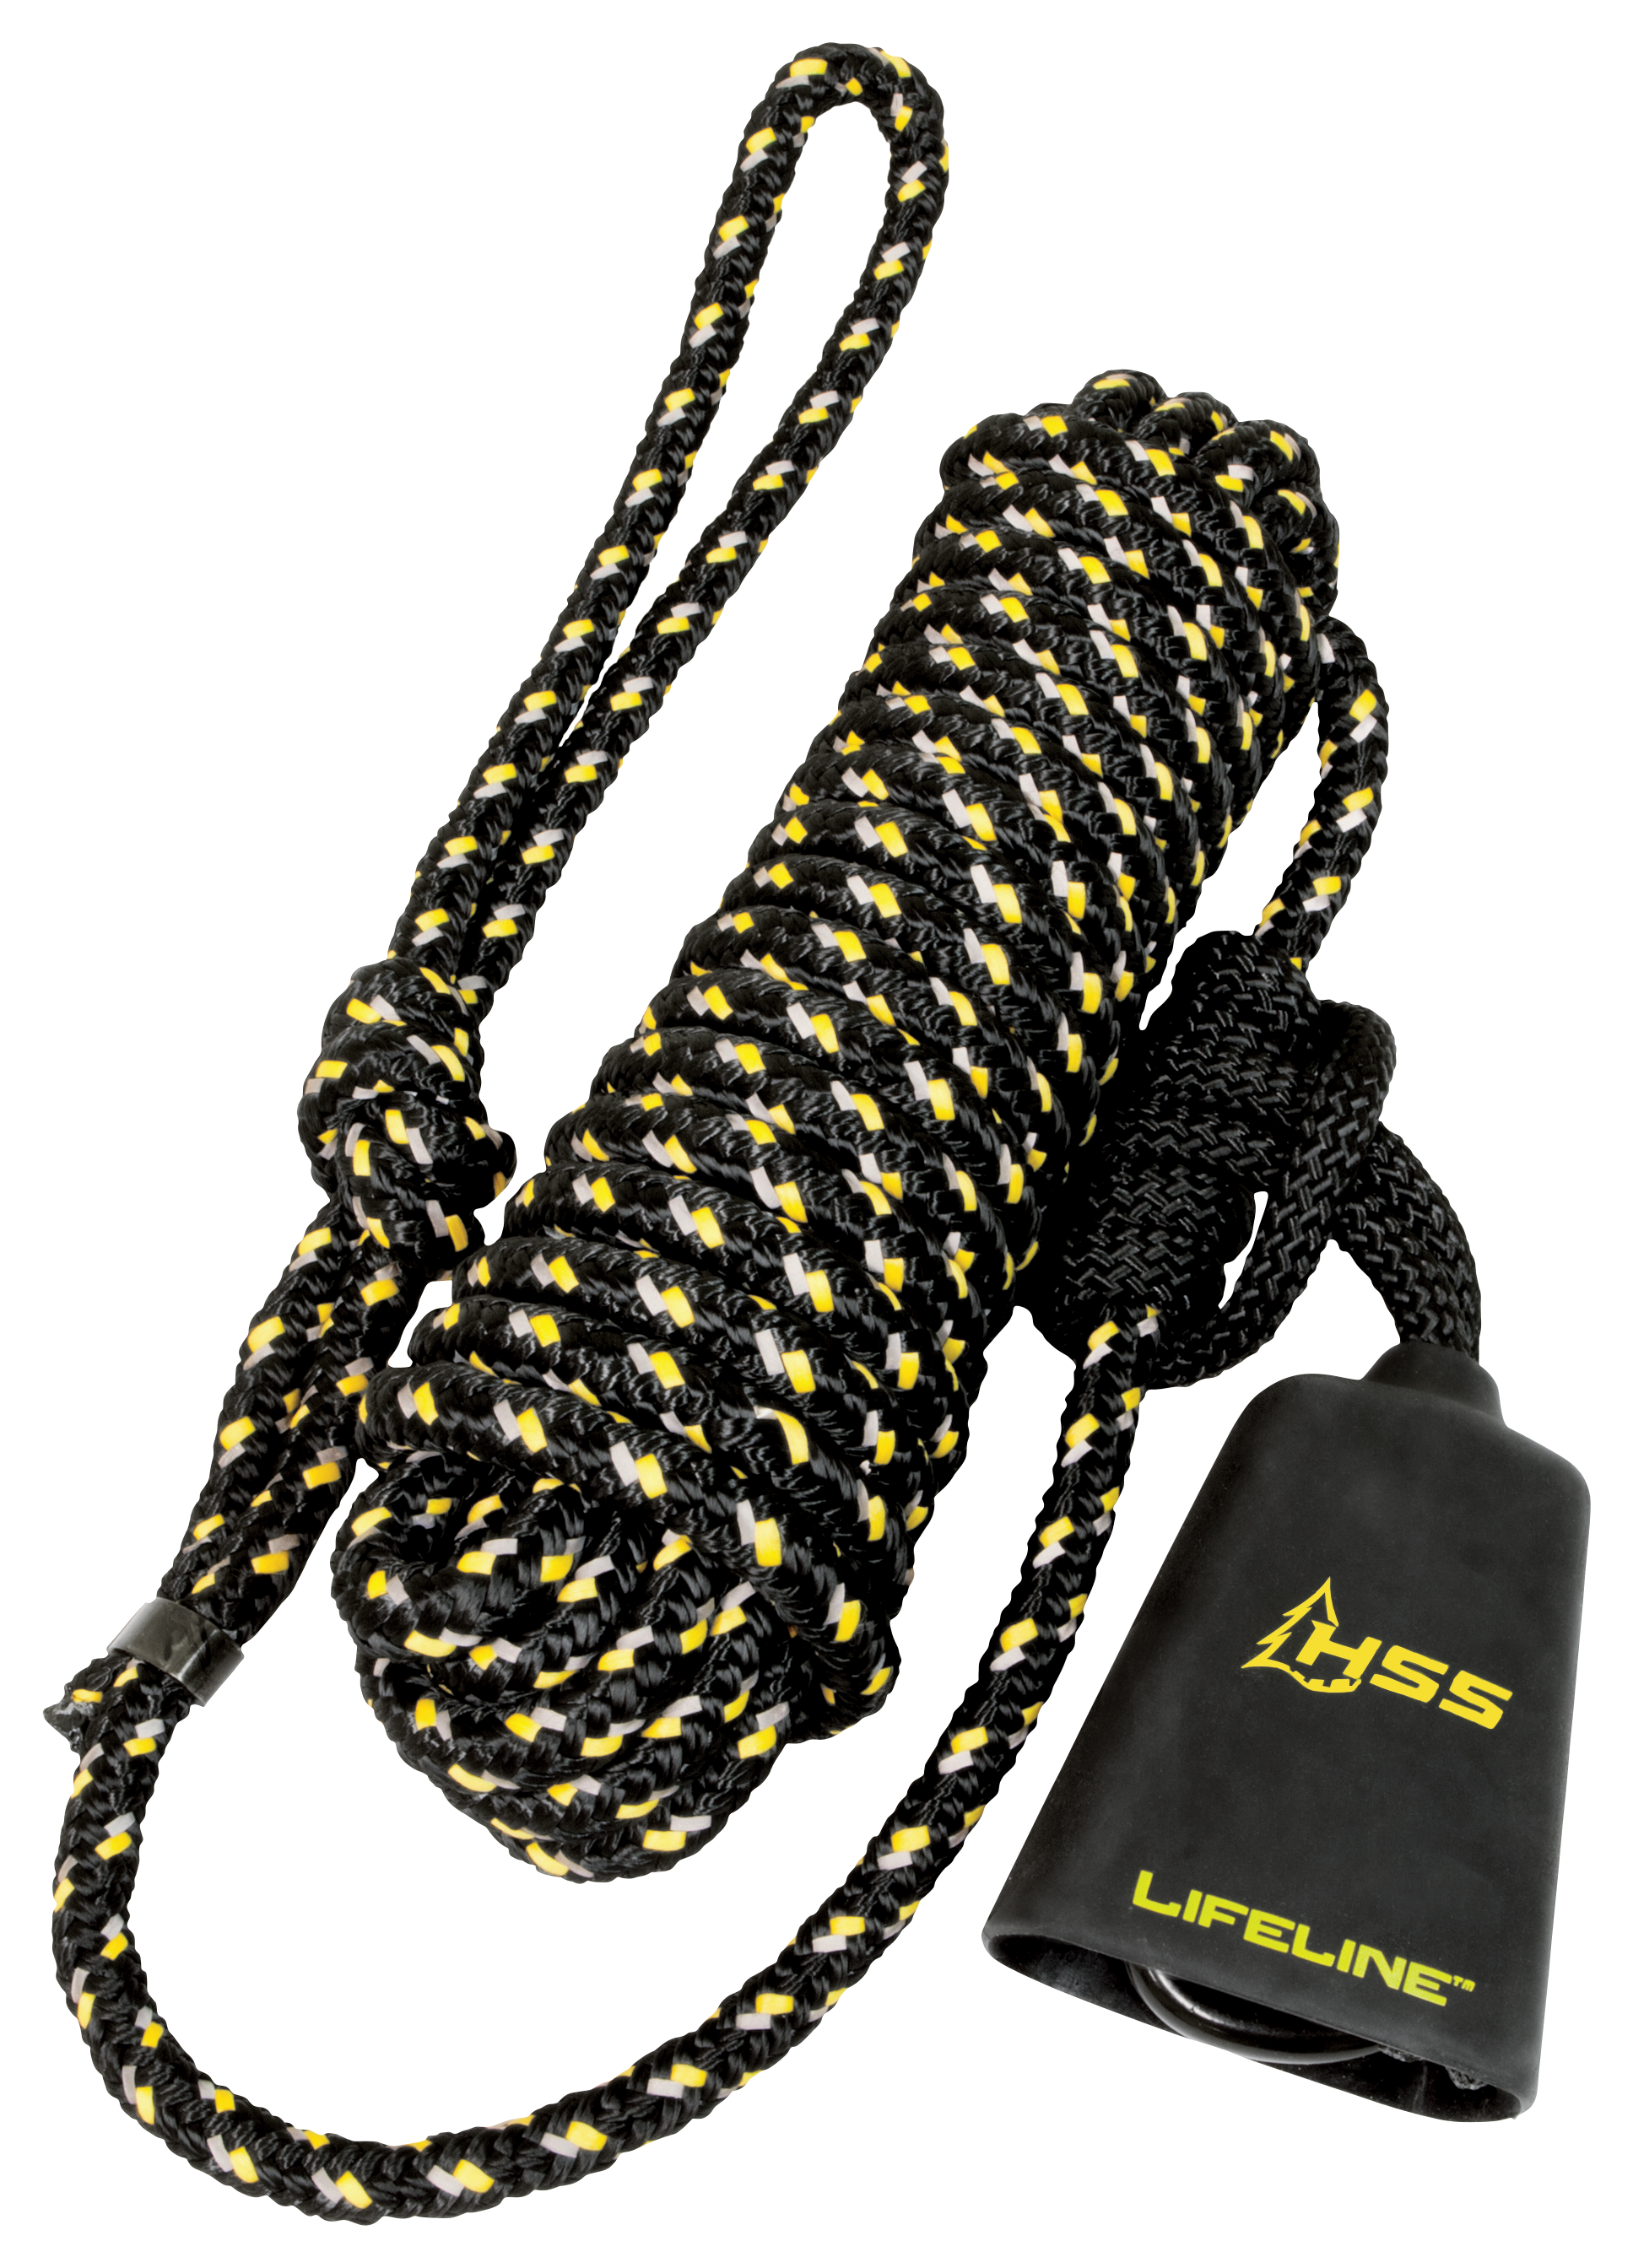 Pursuit Gear Holder and Hoist Rope Combo PRSTGHC